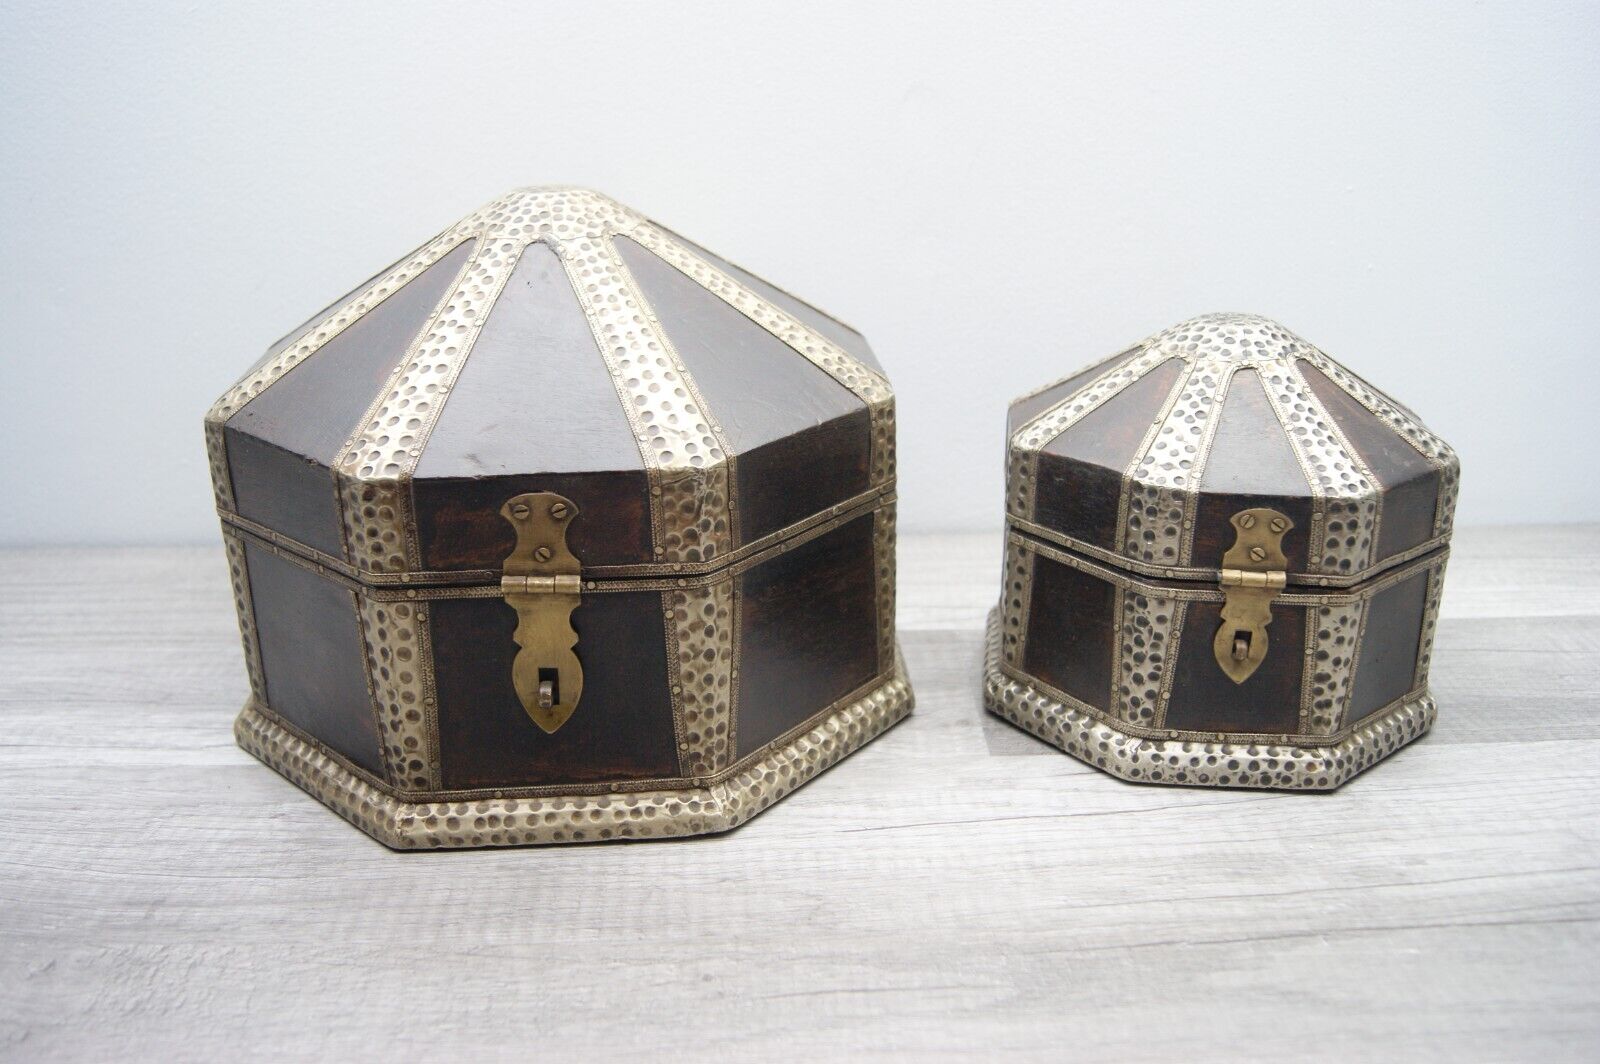 2 Pier1 Hexagon Jewelry/Trinket Boxes (Lg/Med) Wood with Hammered Brass Accents